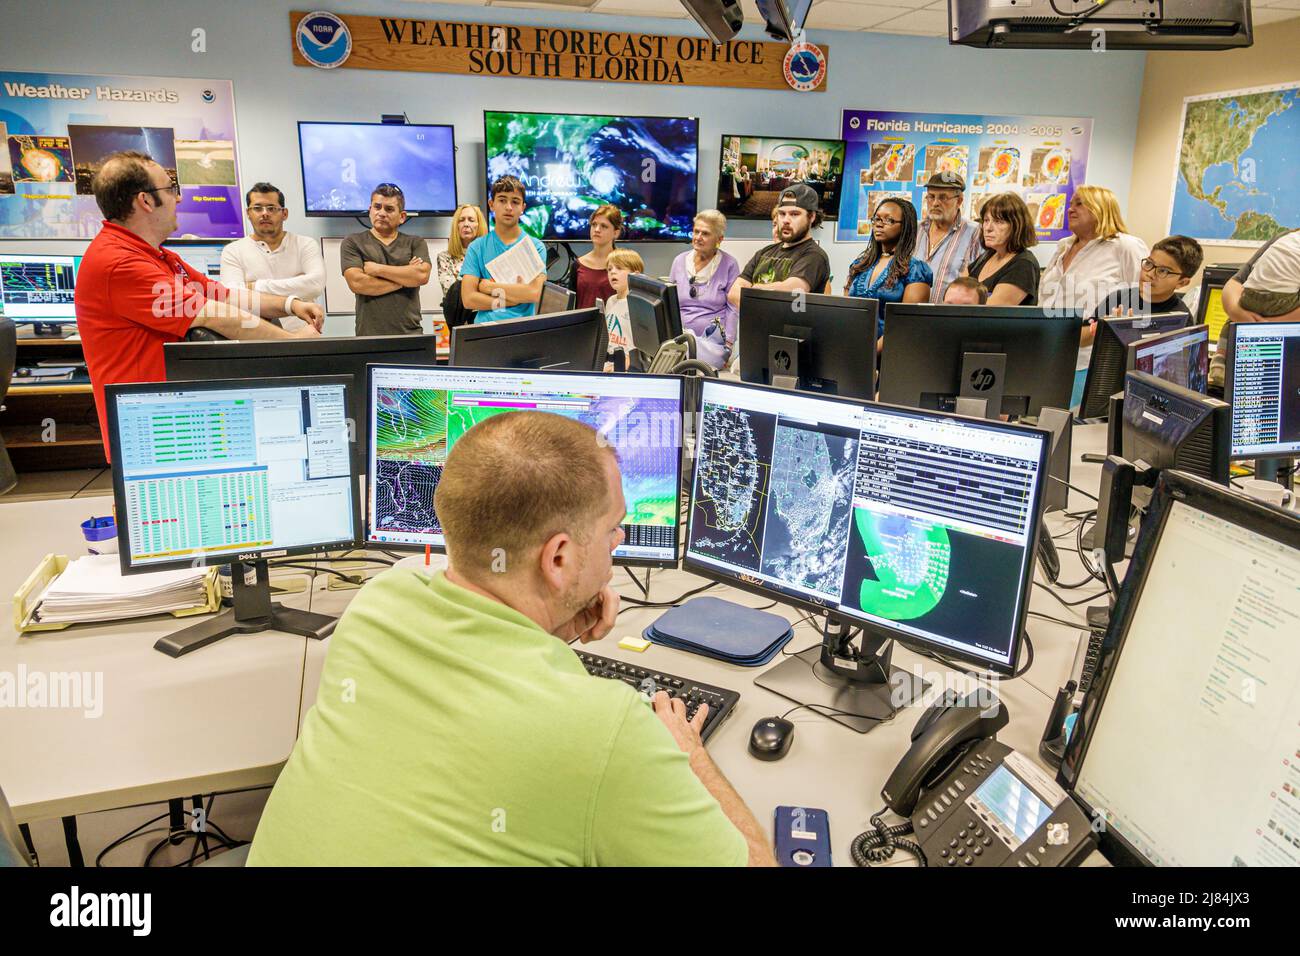 Miami Florida,National Hurricane Center National Weather Service,open house South Florida forecast office,meteorologist male satellite images monitor Stock Photo